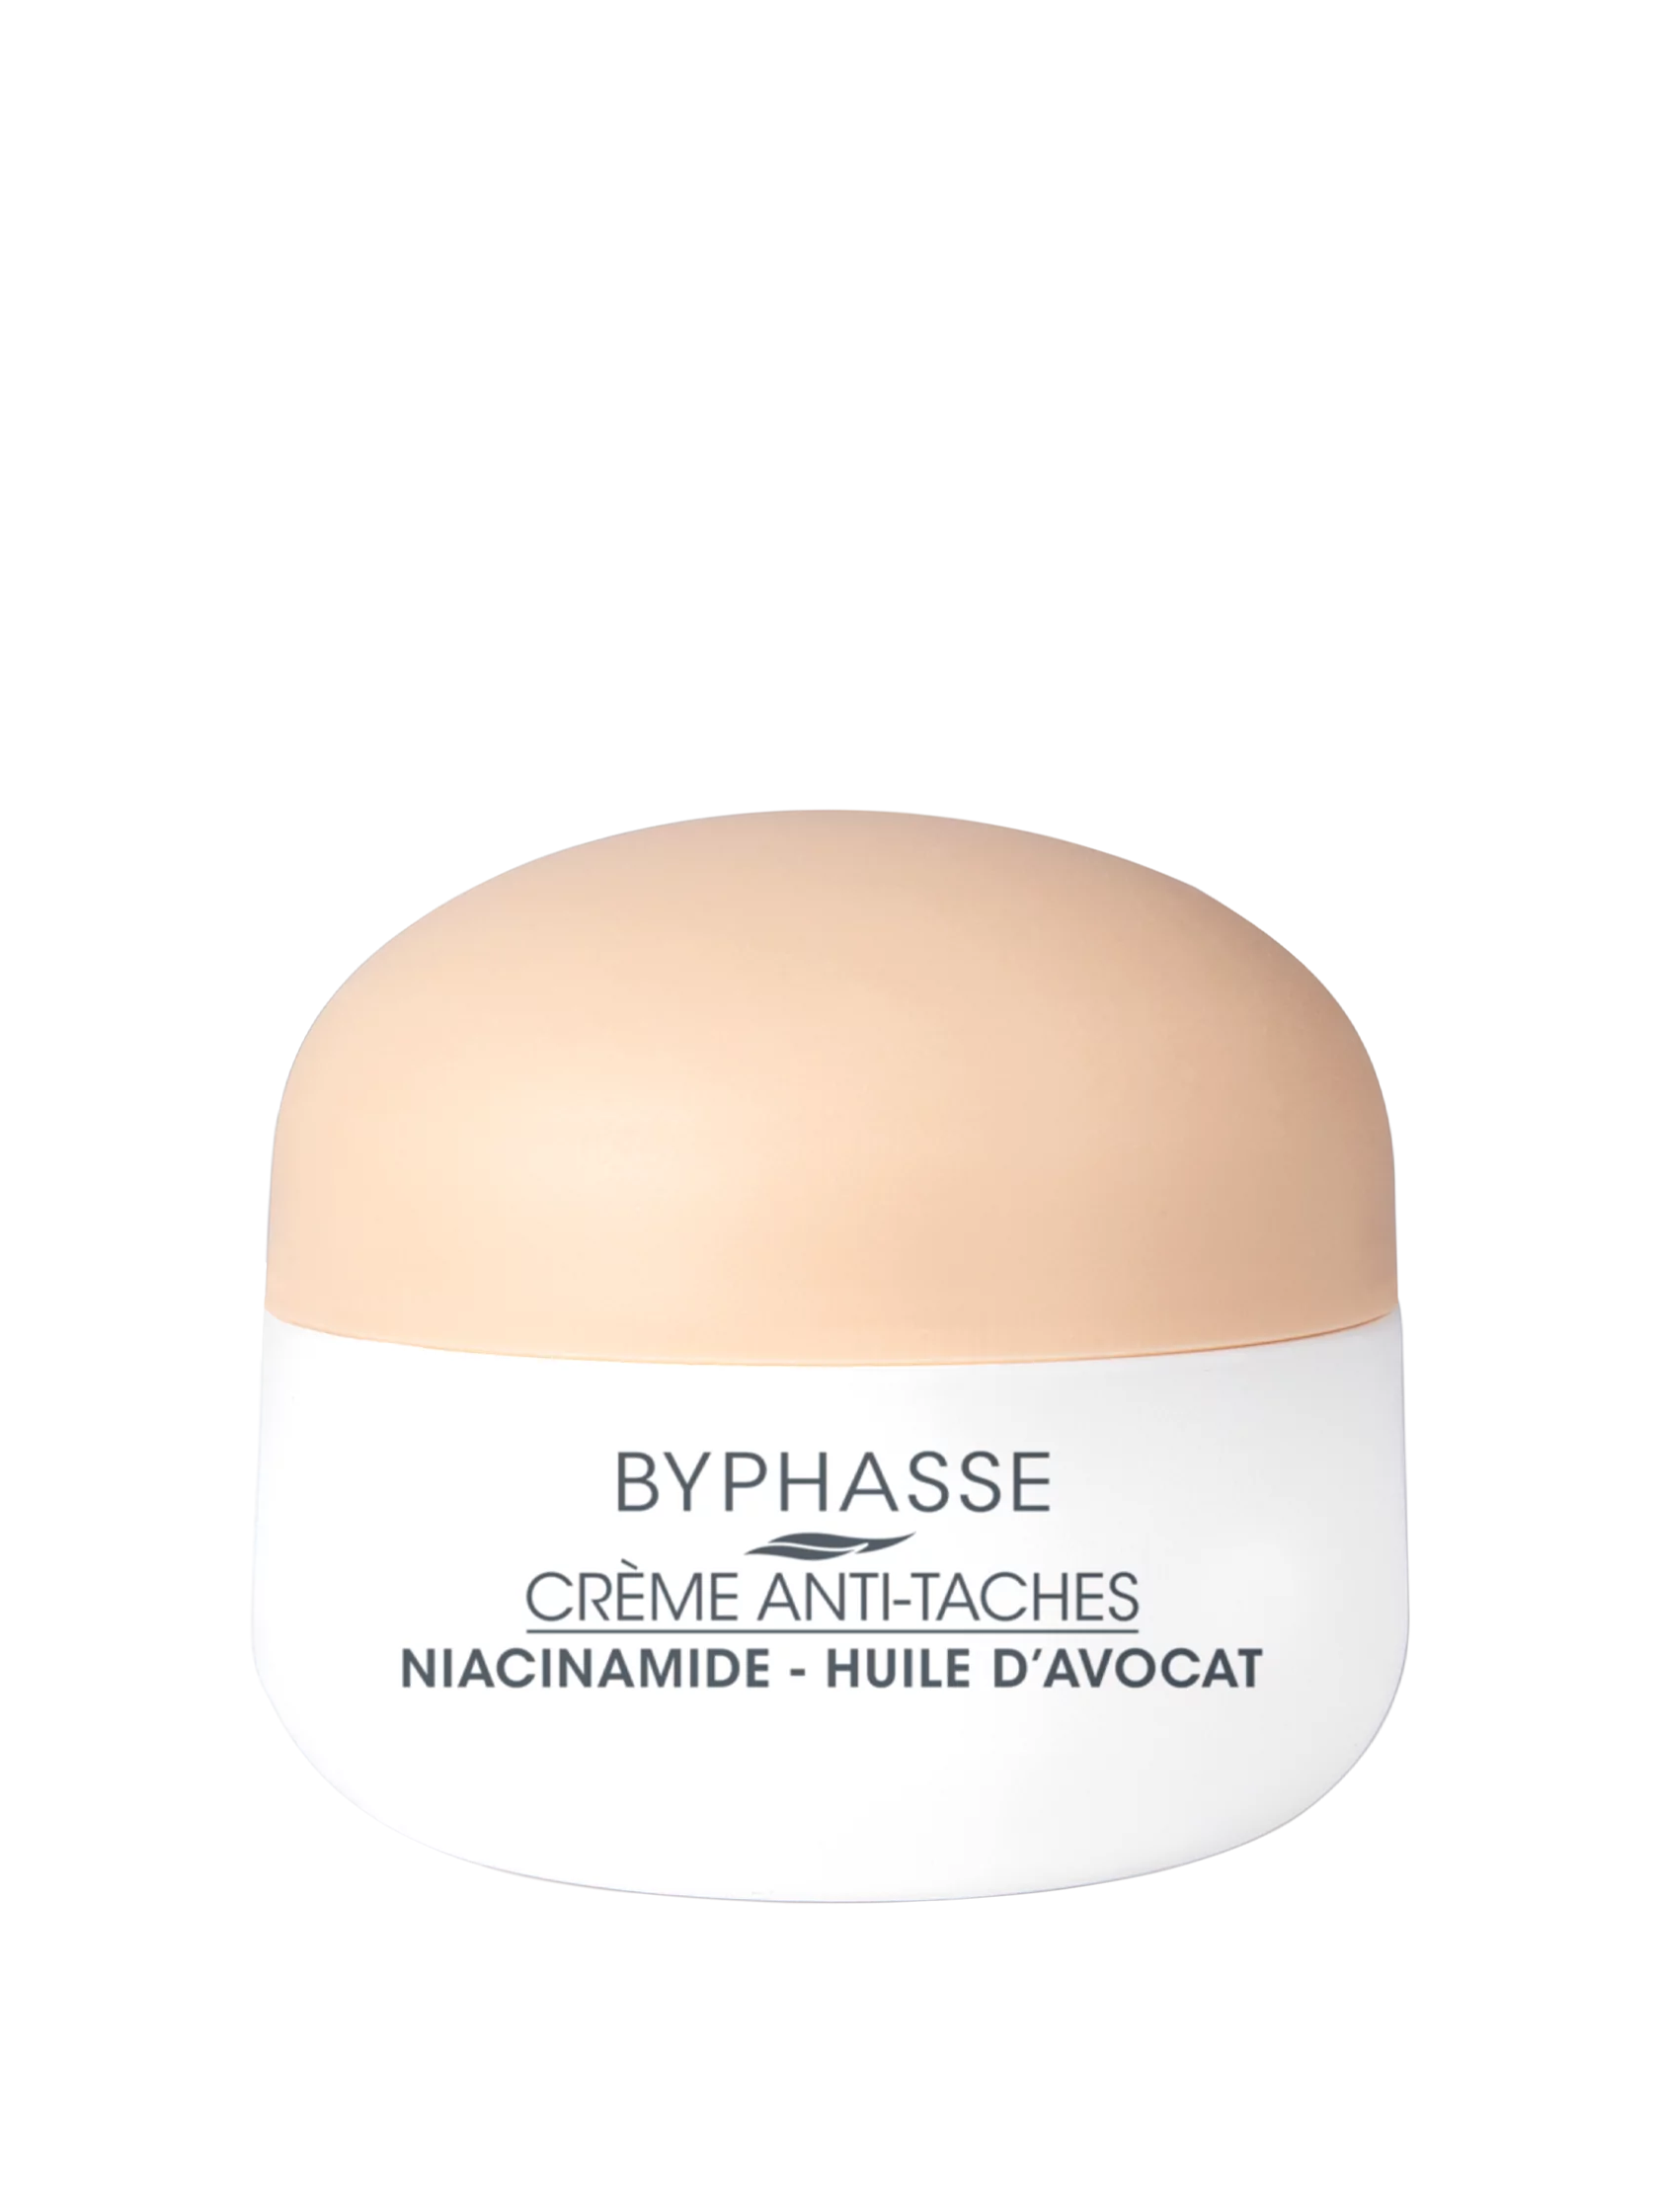 CRÈME ANTI-TACHES NIACINAMIDE SKIN BOOSTER 50 ML product_image